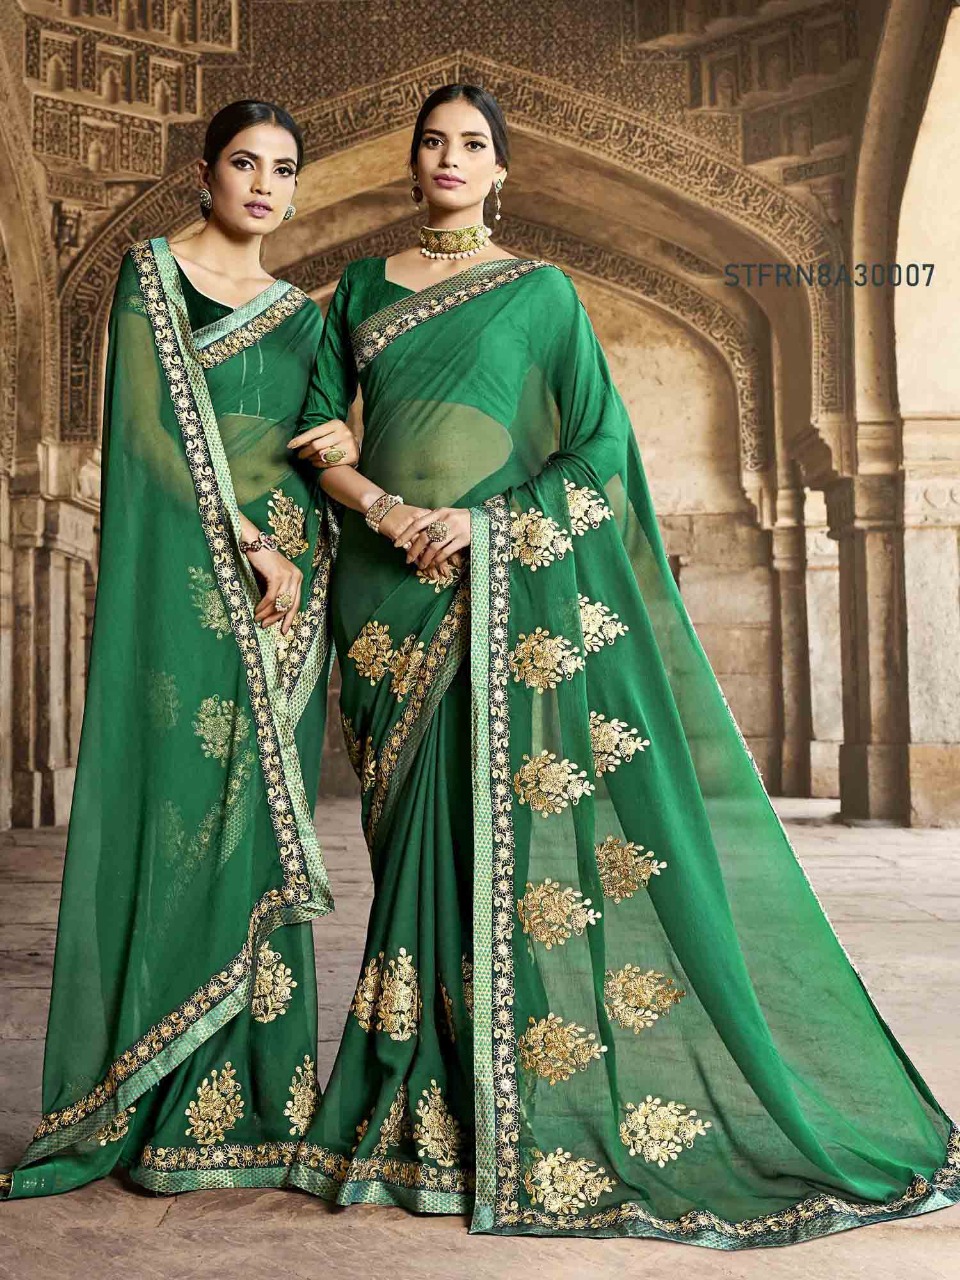 Firangi By Aasvaa 30001 To 30008 Series Indian Traditional Wear Collection Beautiful Stylish Fancy Colorful Party Wear & Occasional Wear Chiffon Sarees At Wholesale Price